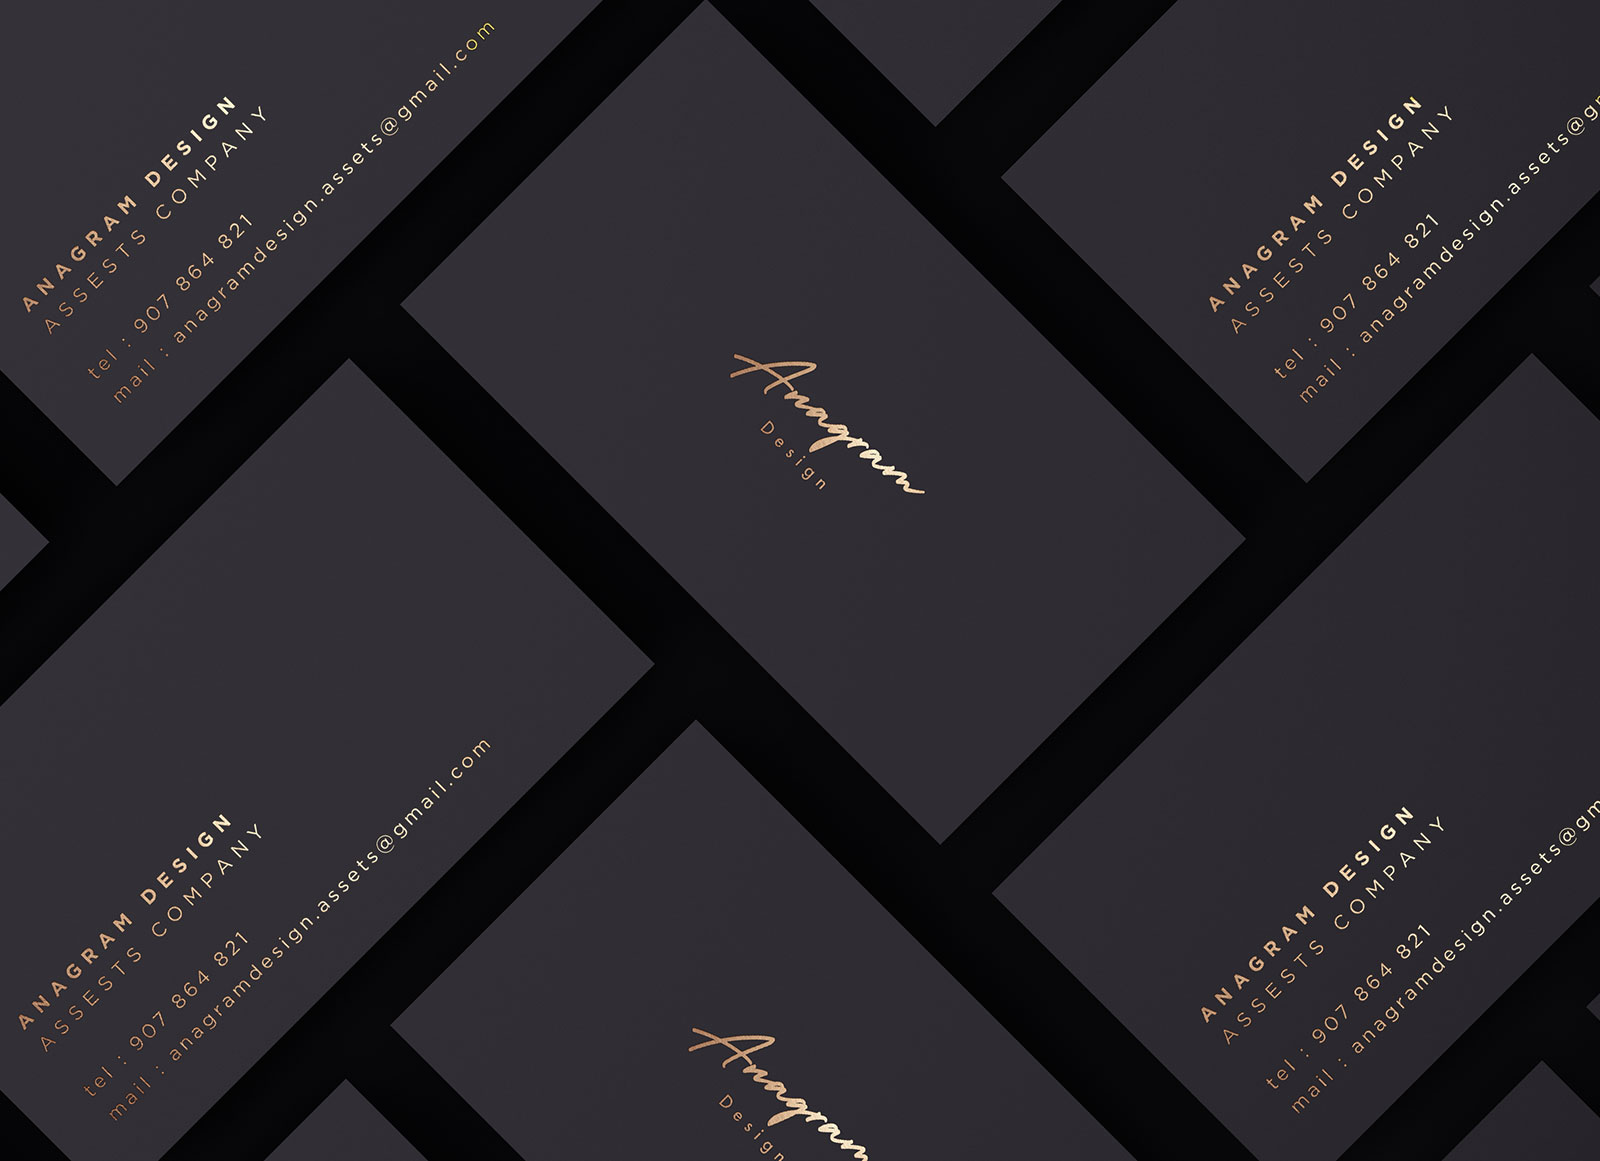 Premium PSD  Business card with envelope mockup